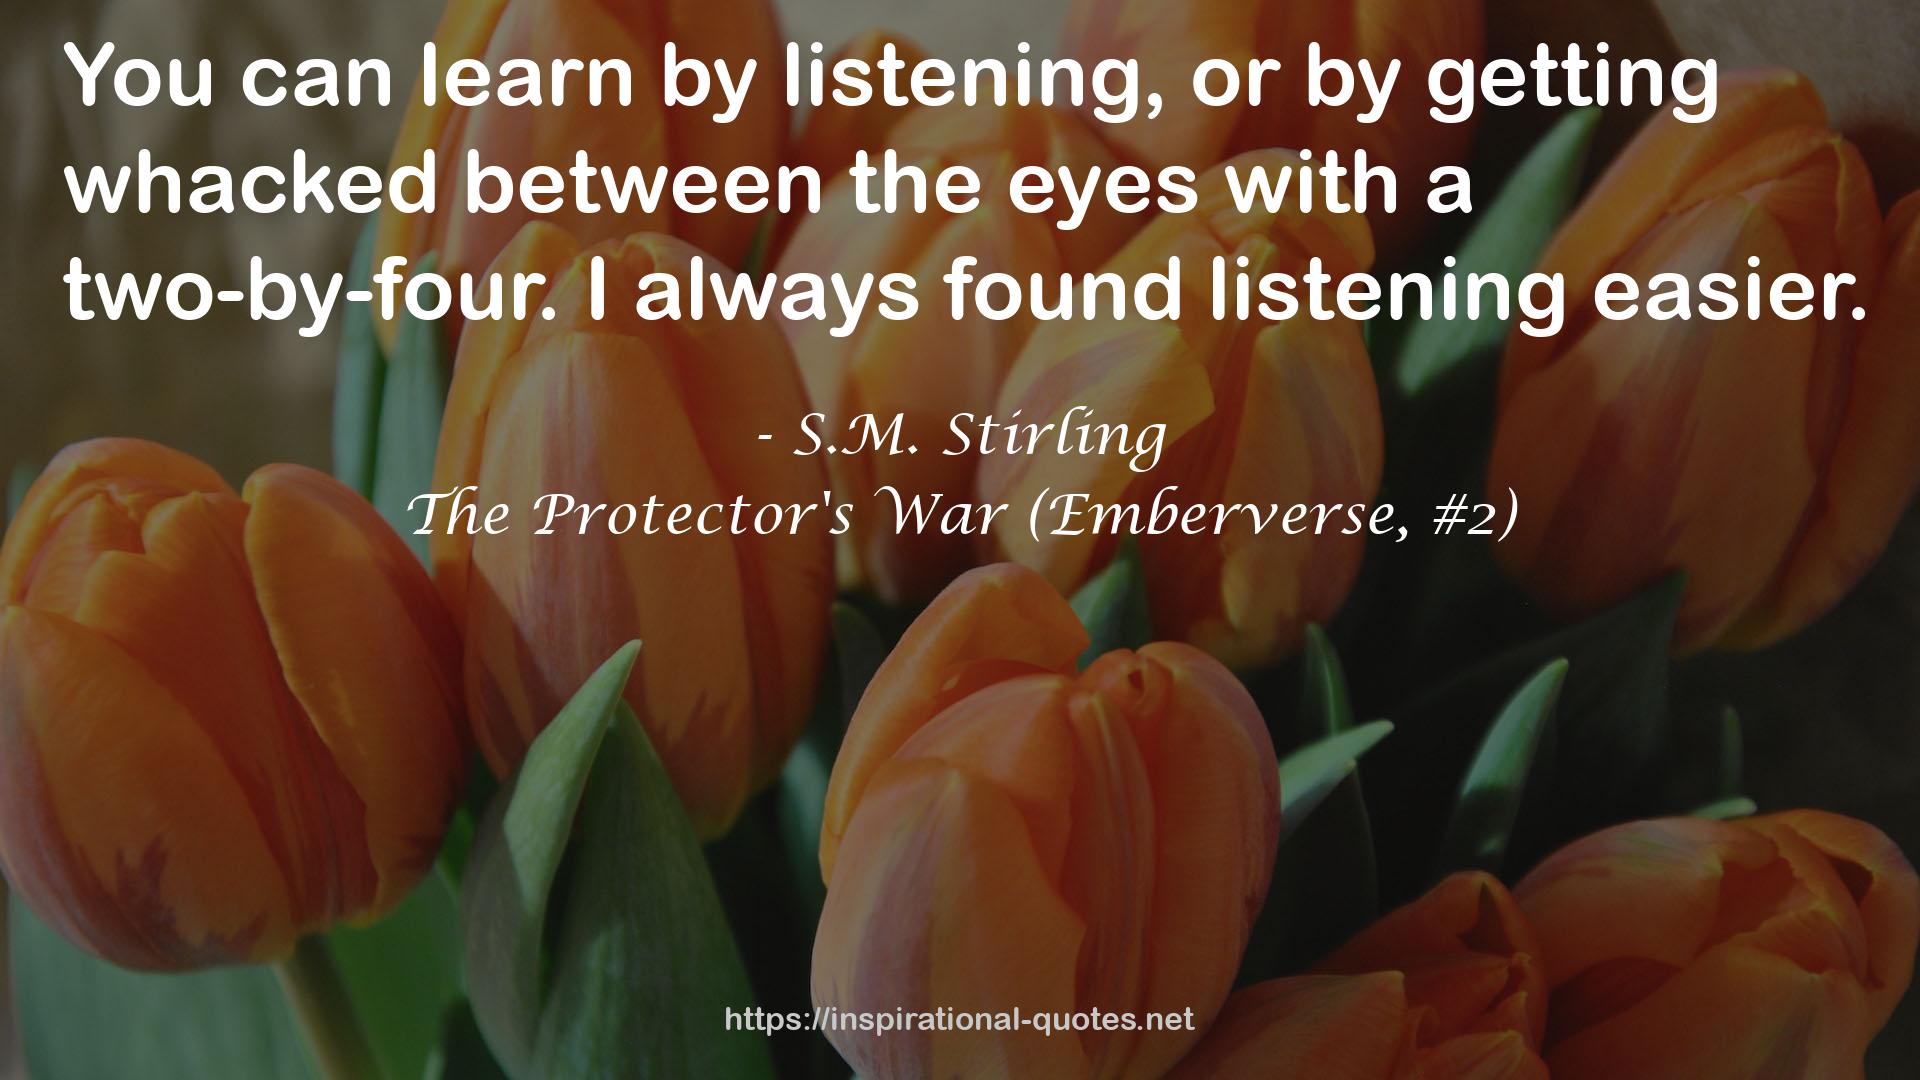 The Protector's War (Emberverse, #2) QUOTES